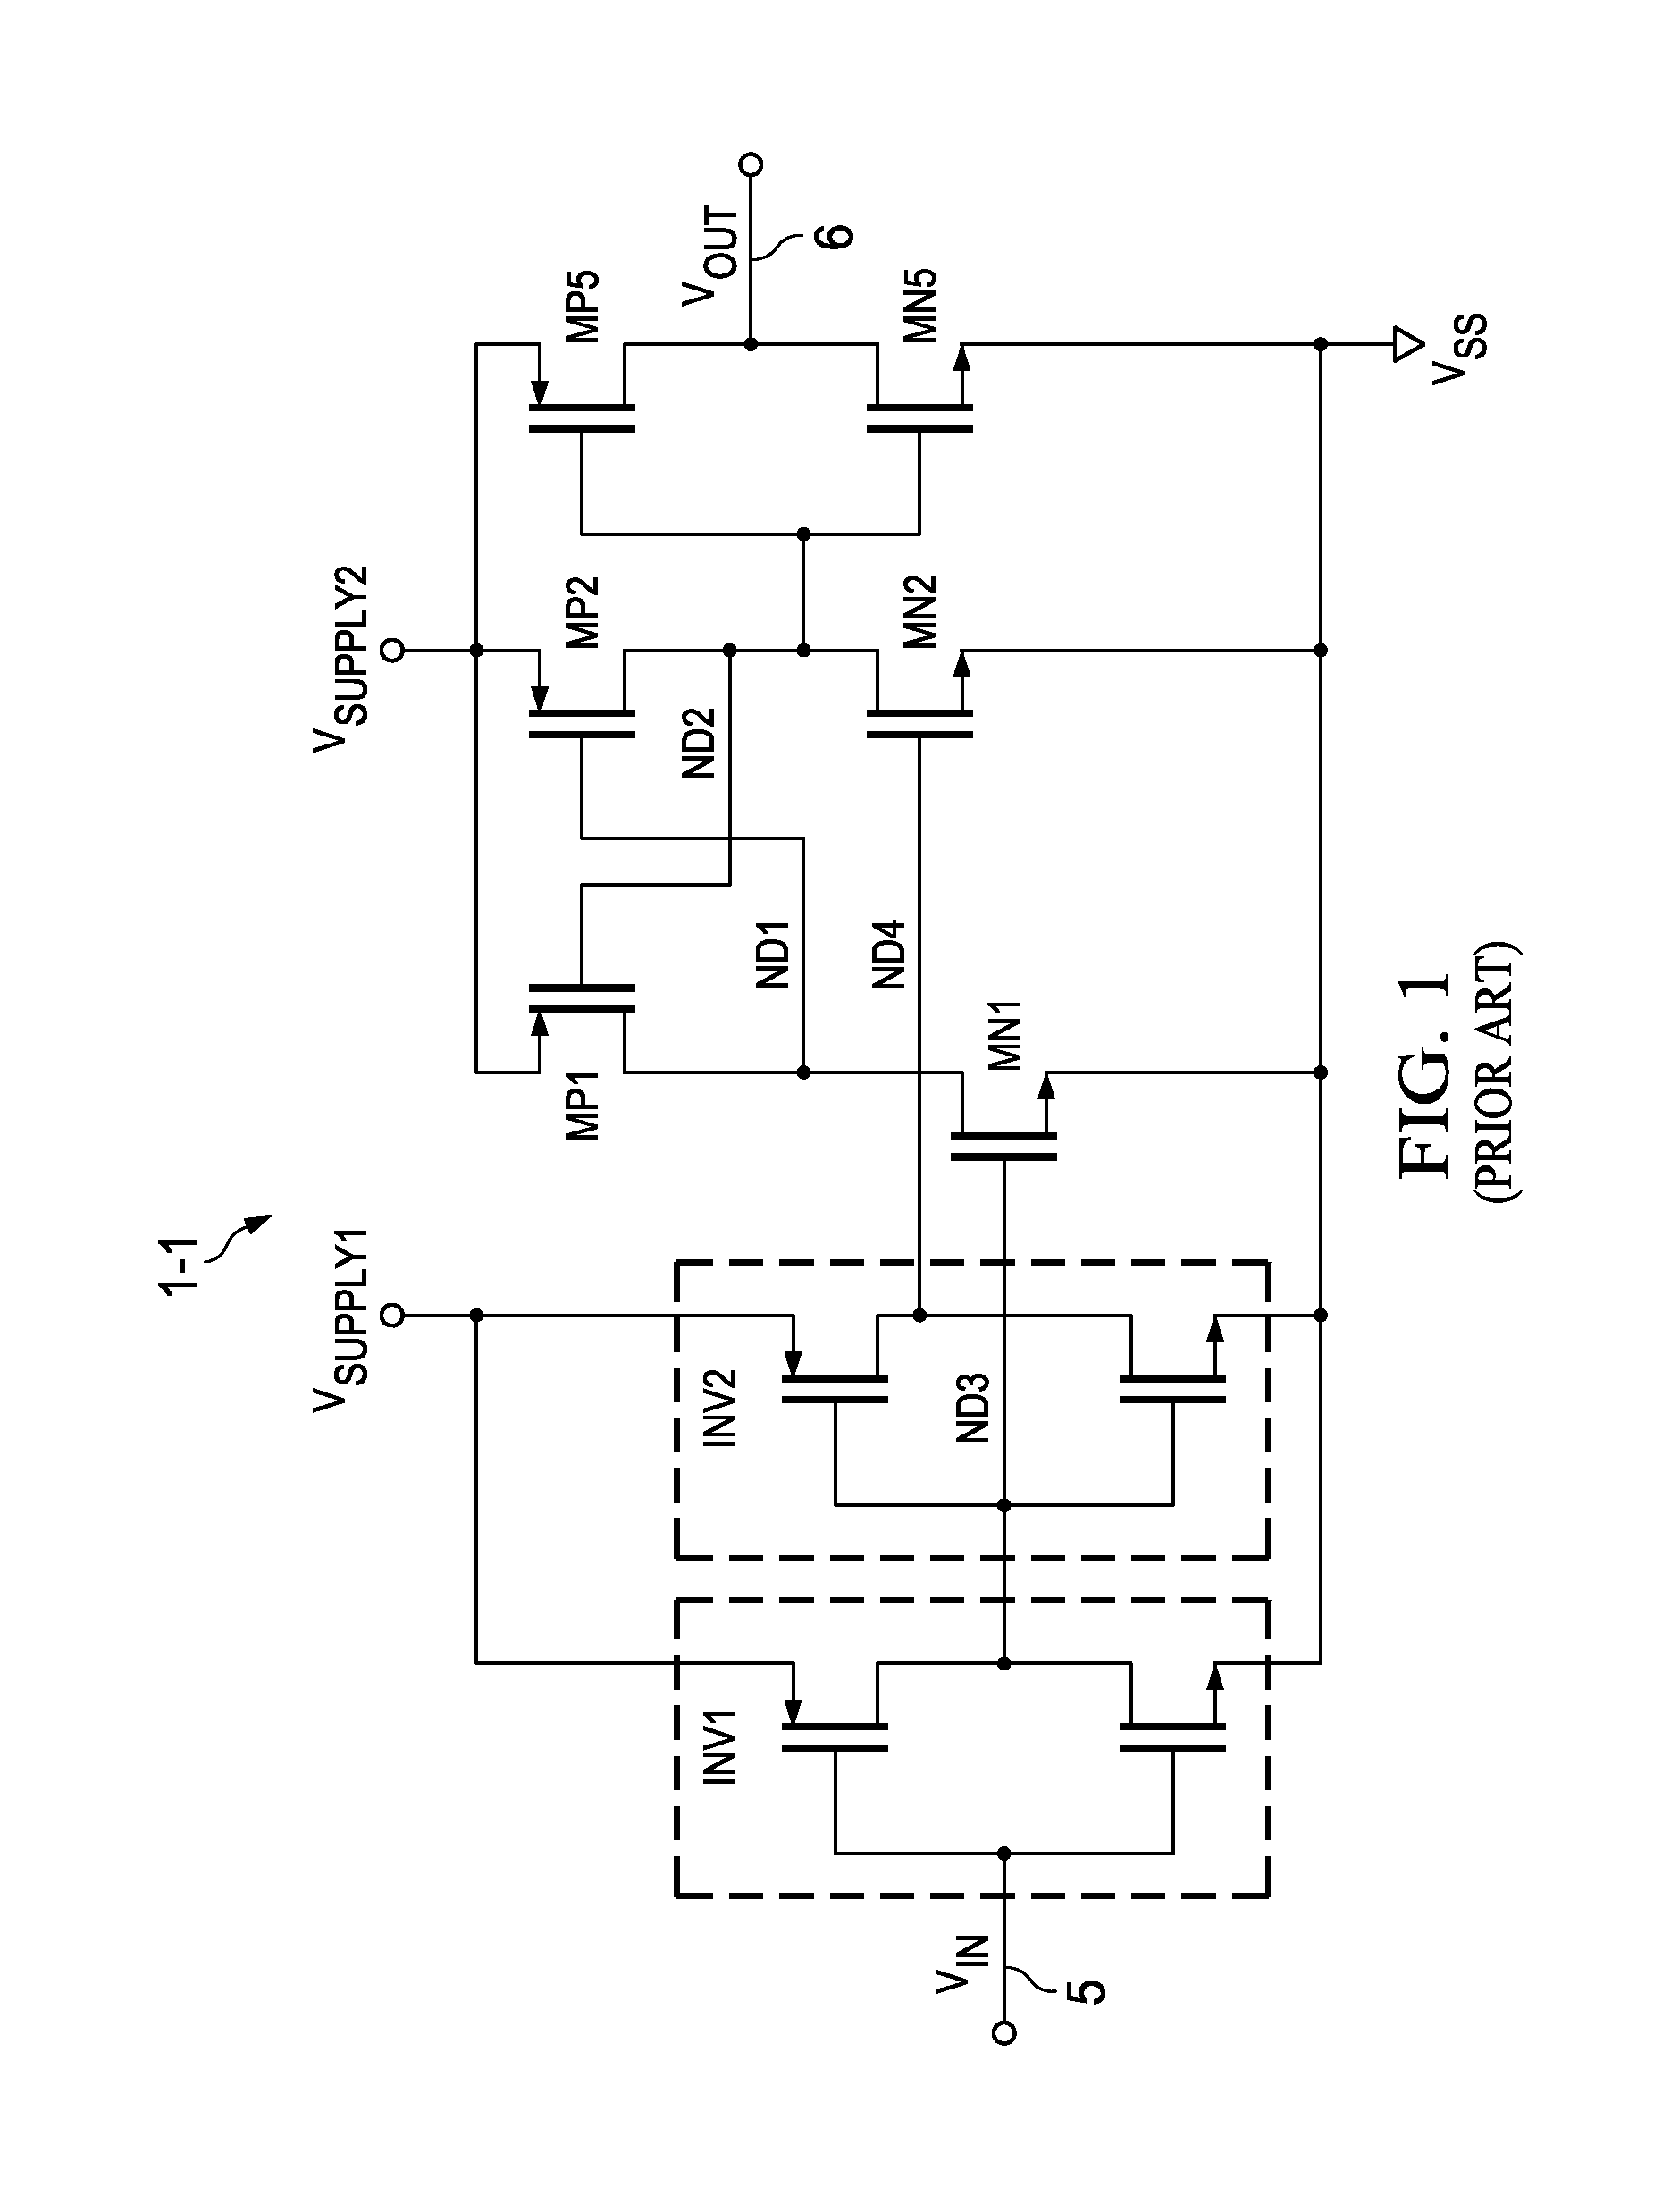 Supply-state-enabled level shifter interface circuit and method